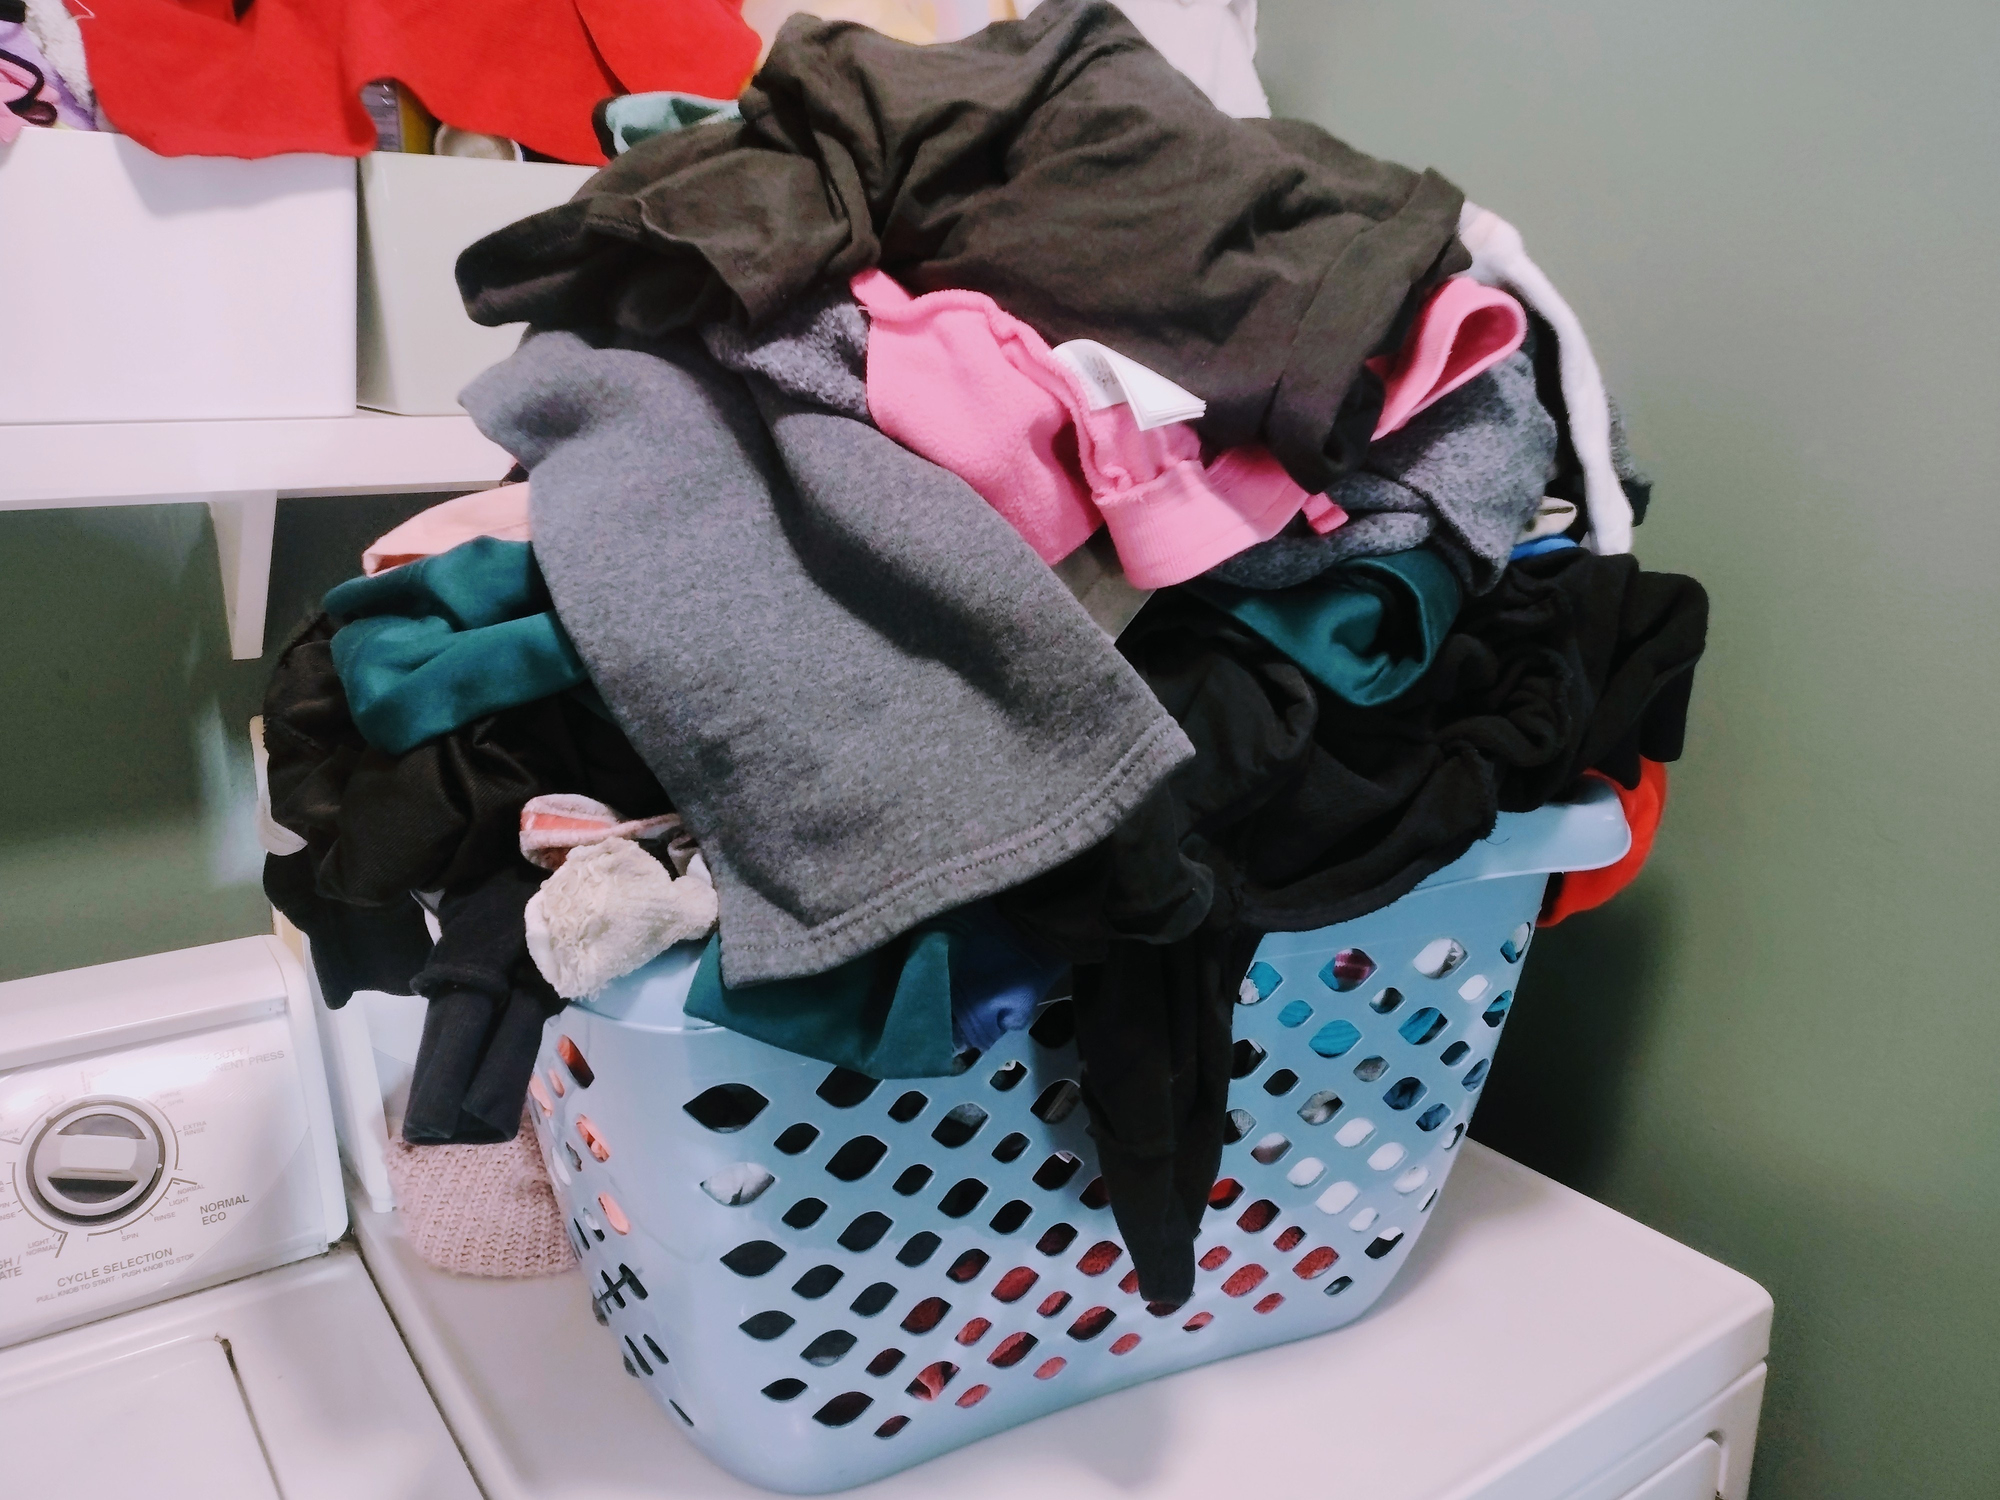 A laundry basket overflowing with assorted clothes, atop a washing machine